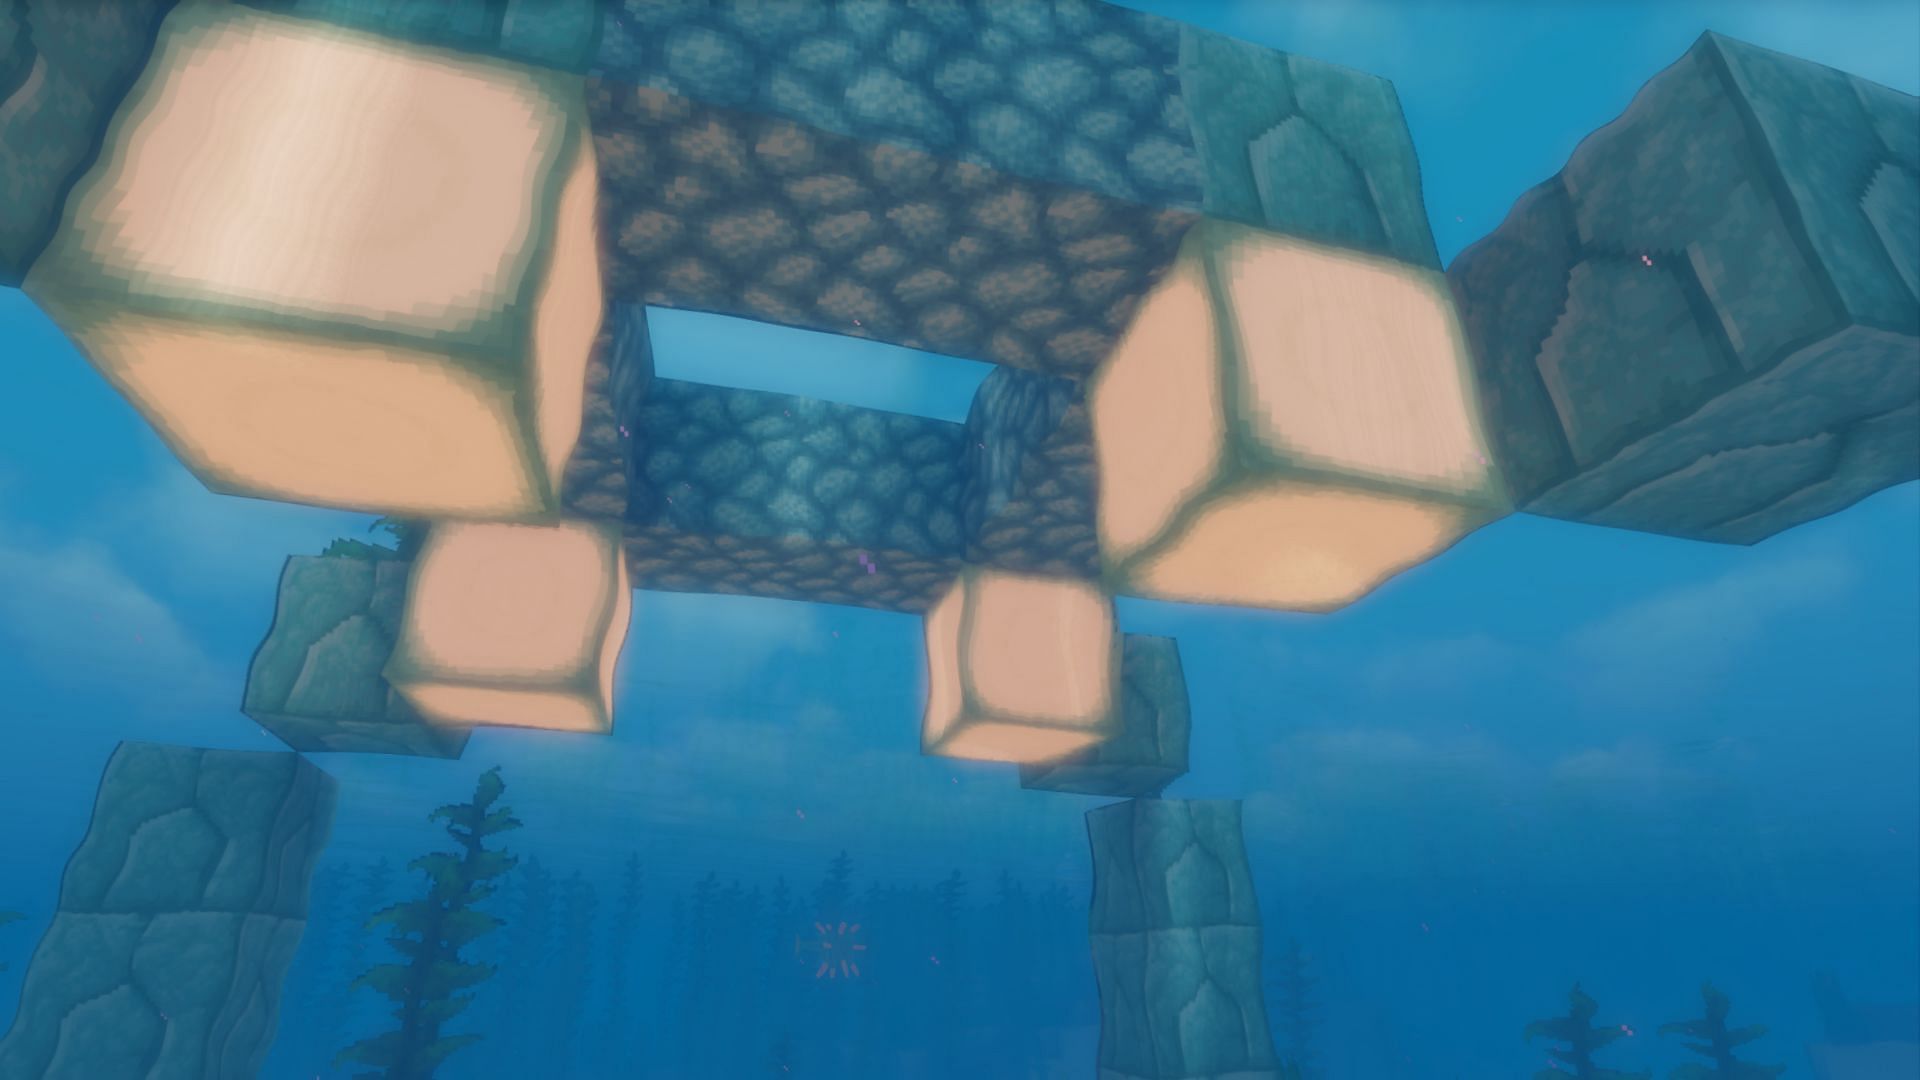 Naturally generated sea lanterns in an ocean monument (Image via Minecraft)